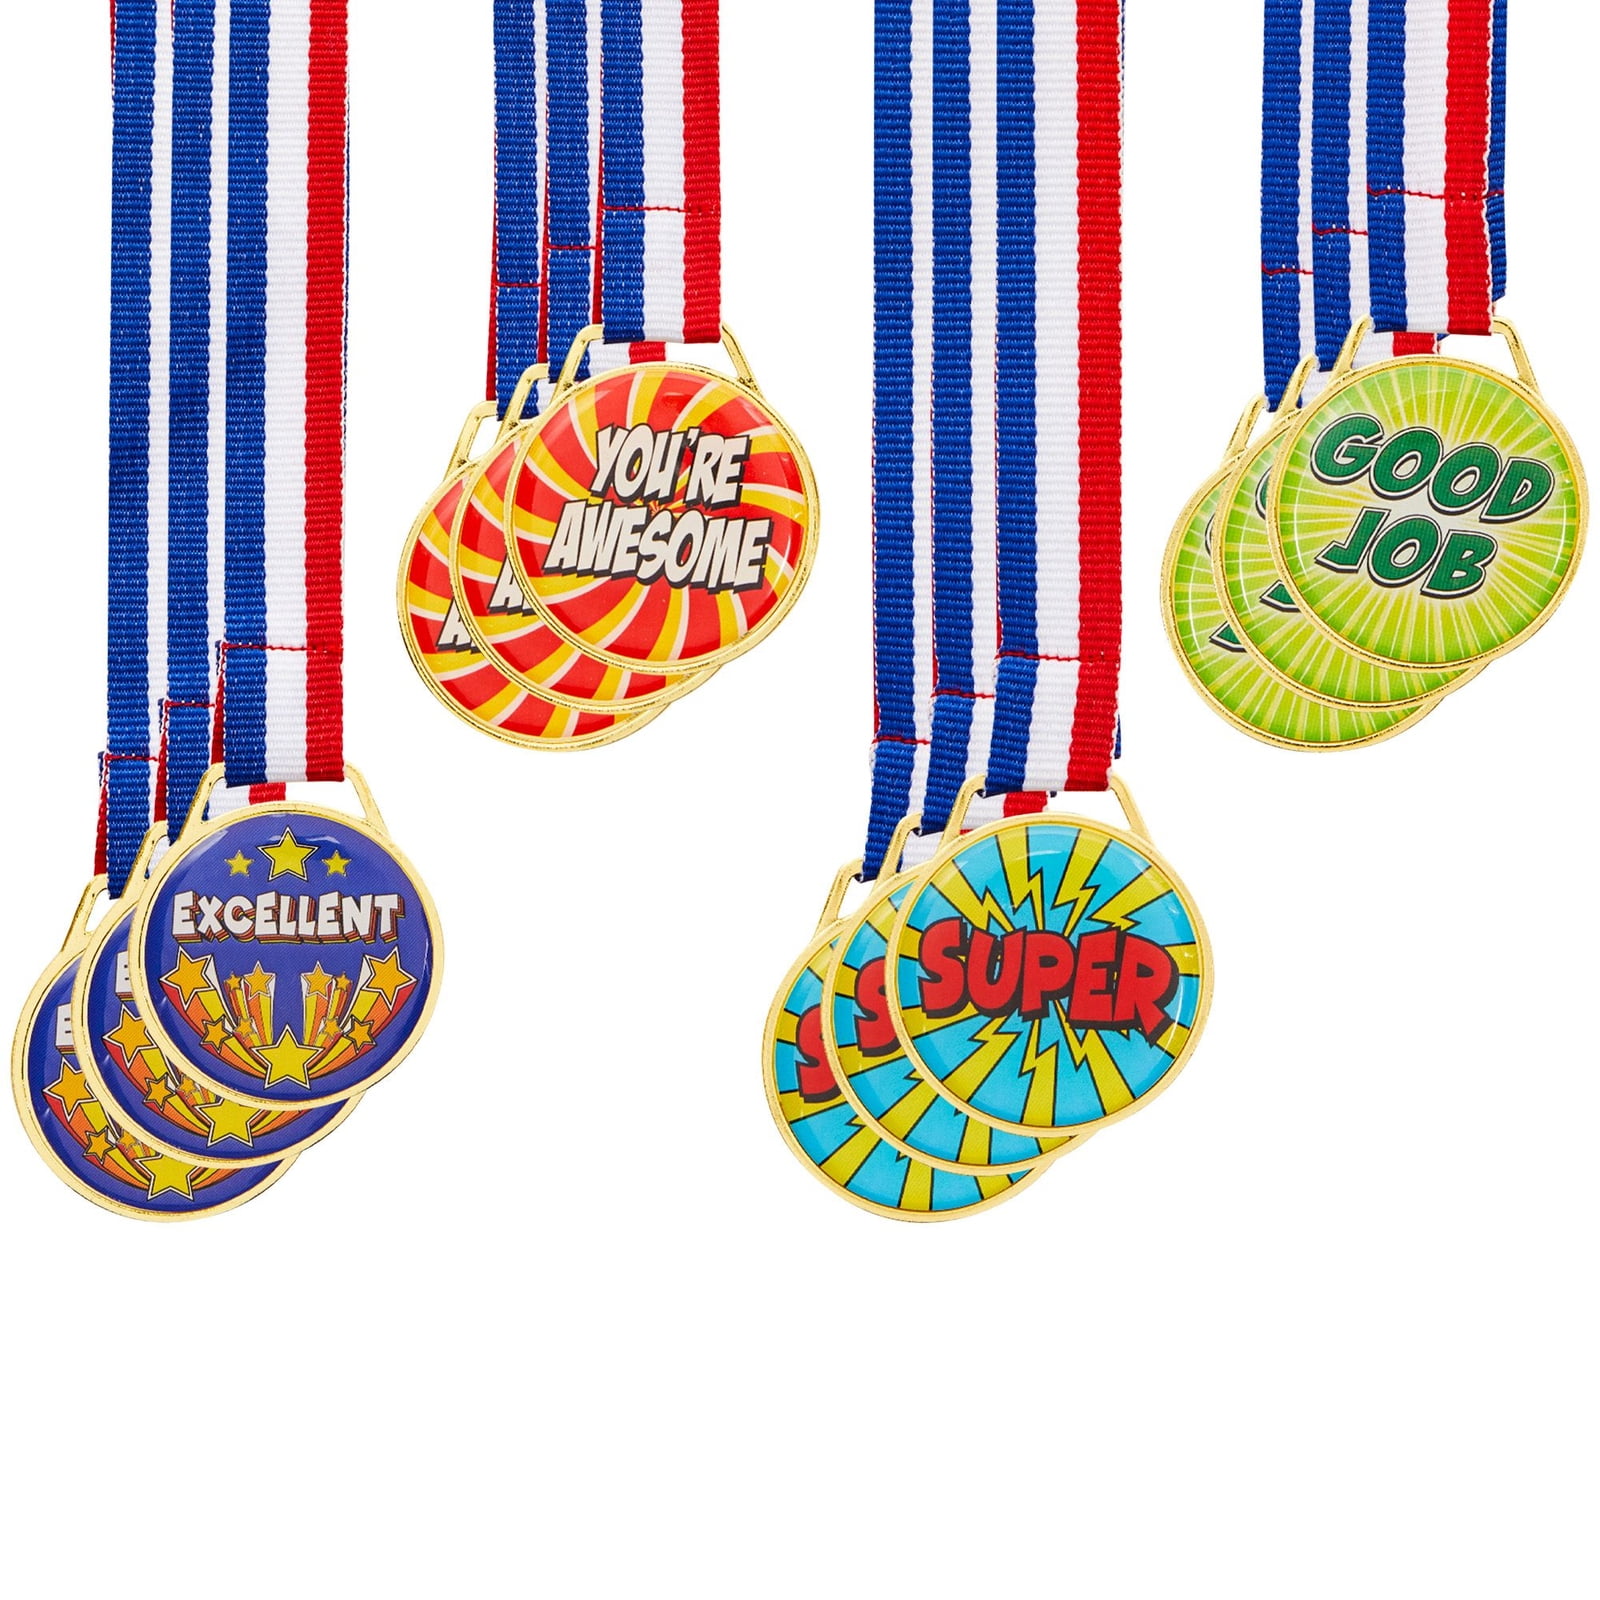 Kisangel 24pcs Winner Medals Simulation Party Games Plastic Medal with Ribbon Match Spelling Bee Medals for Children 